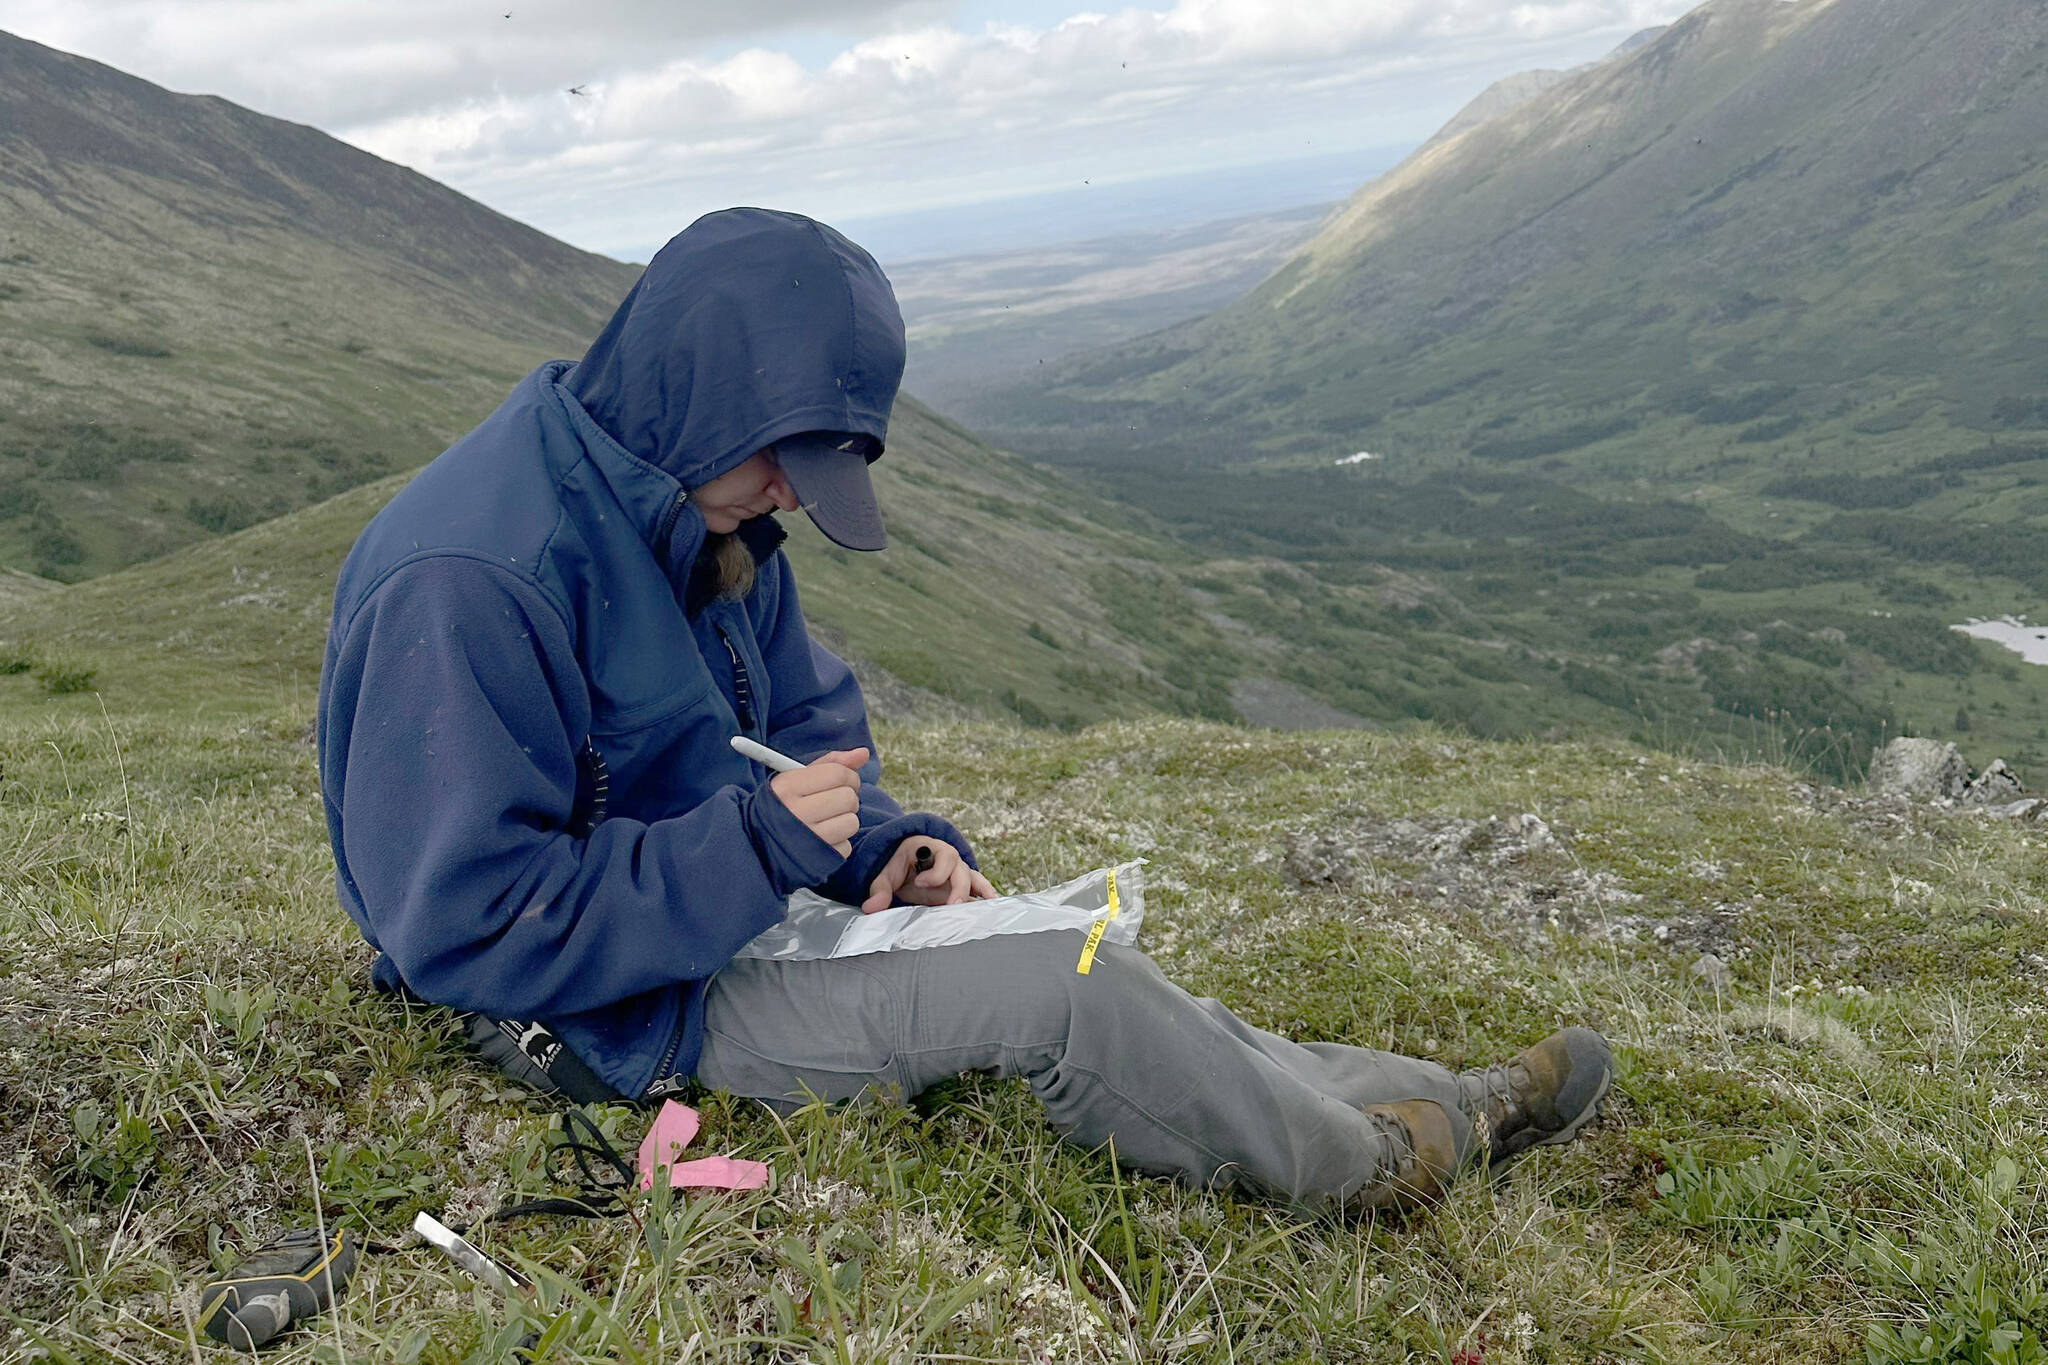 A U.S. Fish and Wildlife Service volunteer intern collects data in the Alpine. (Photo by Jackie Morton/FWS)